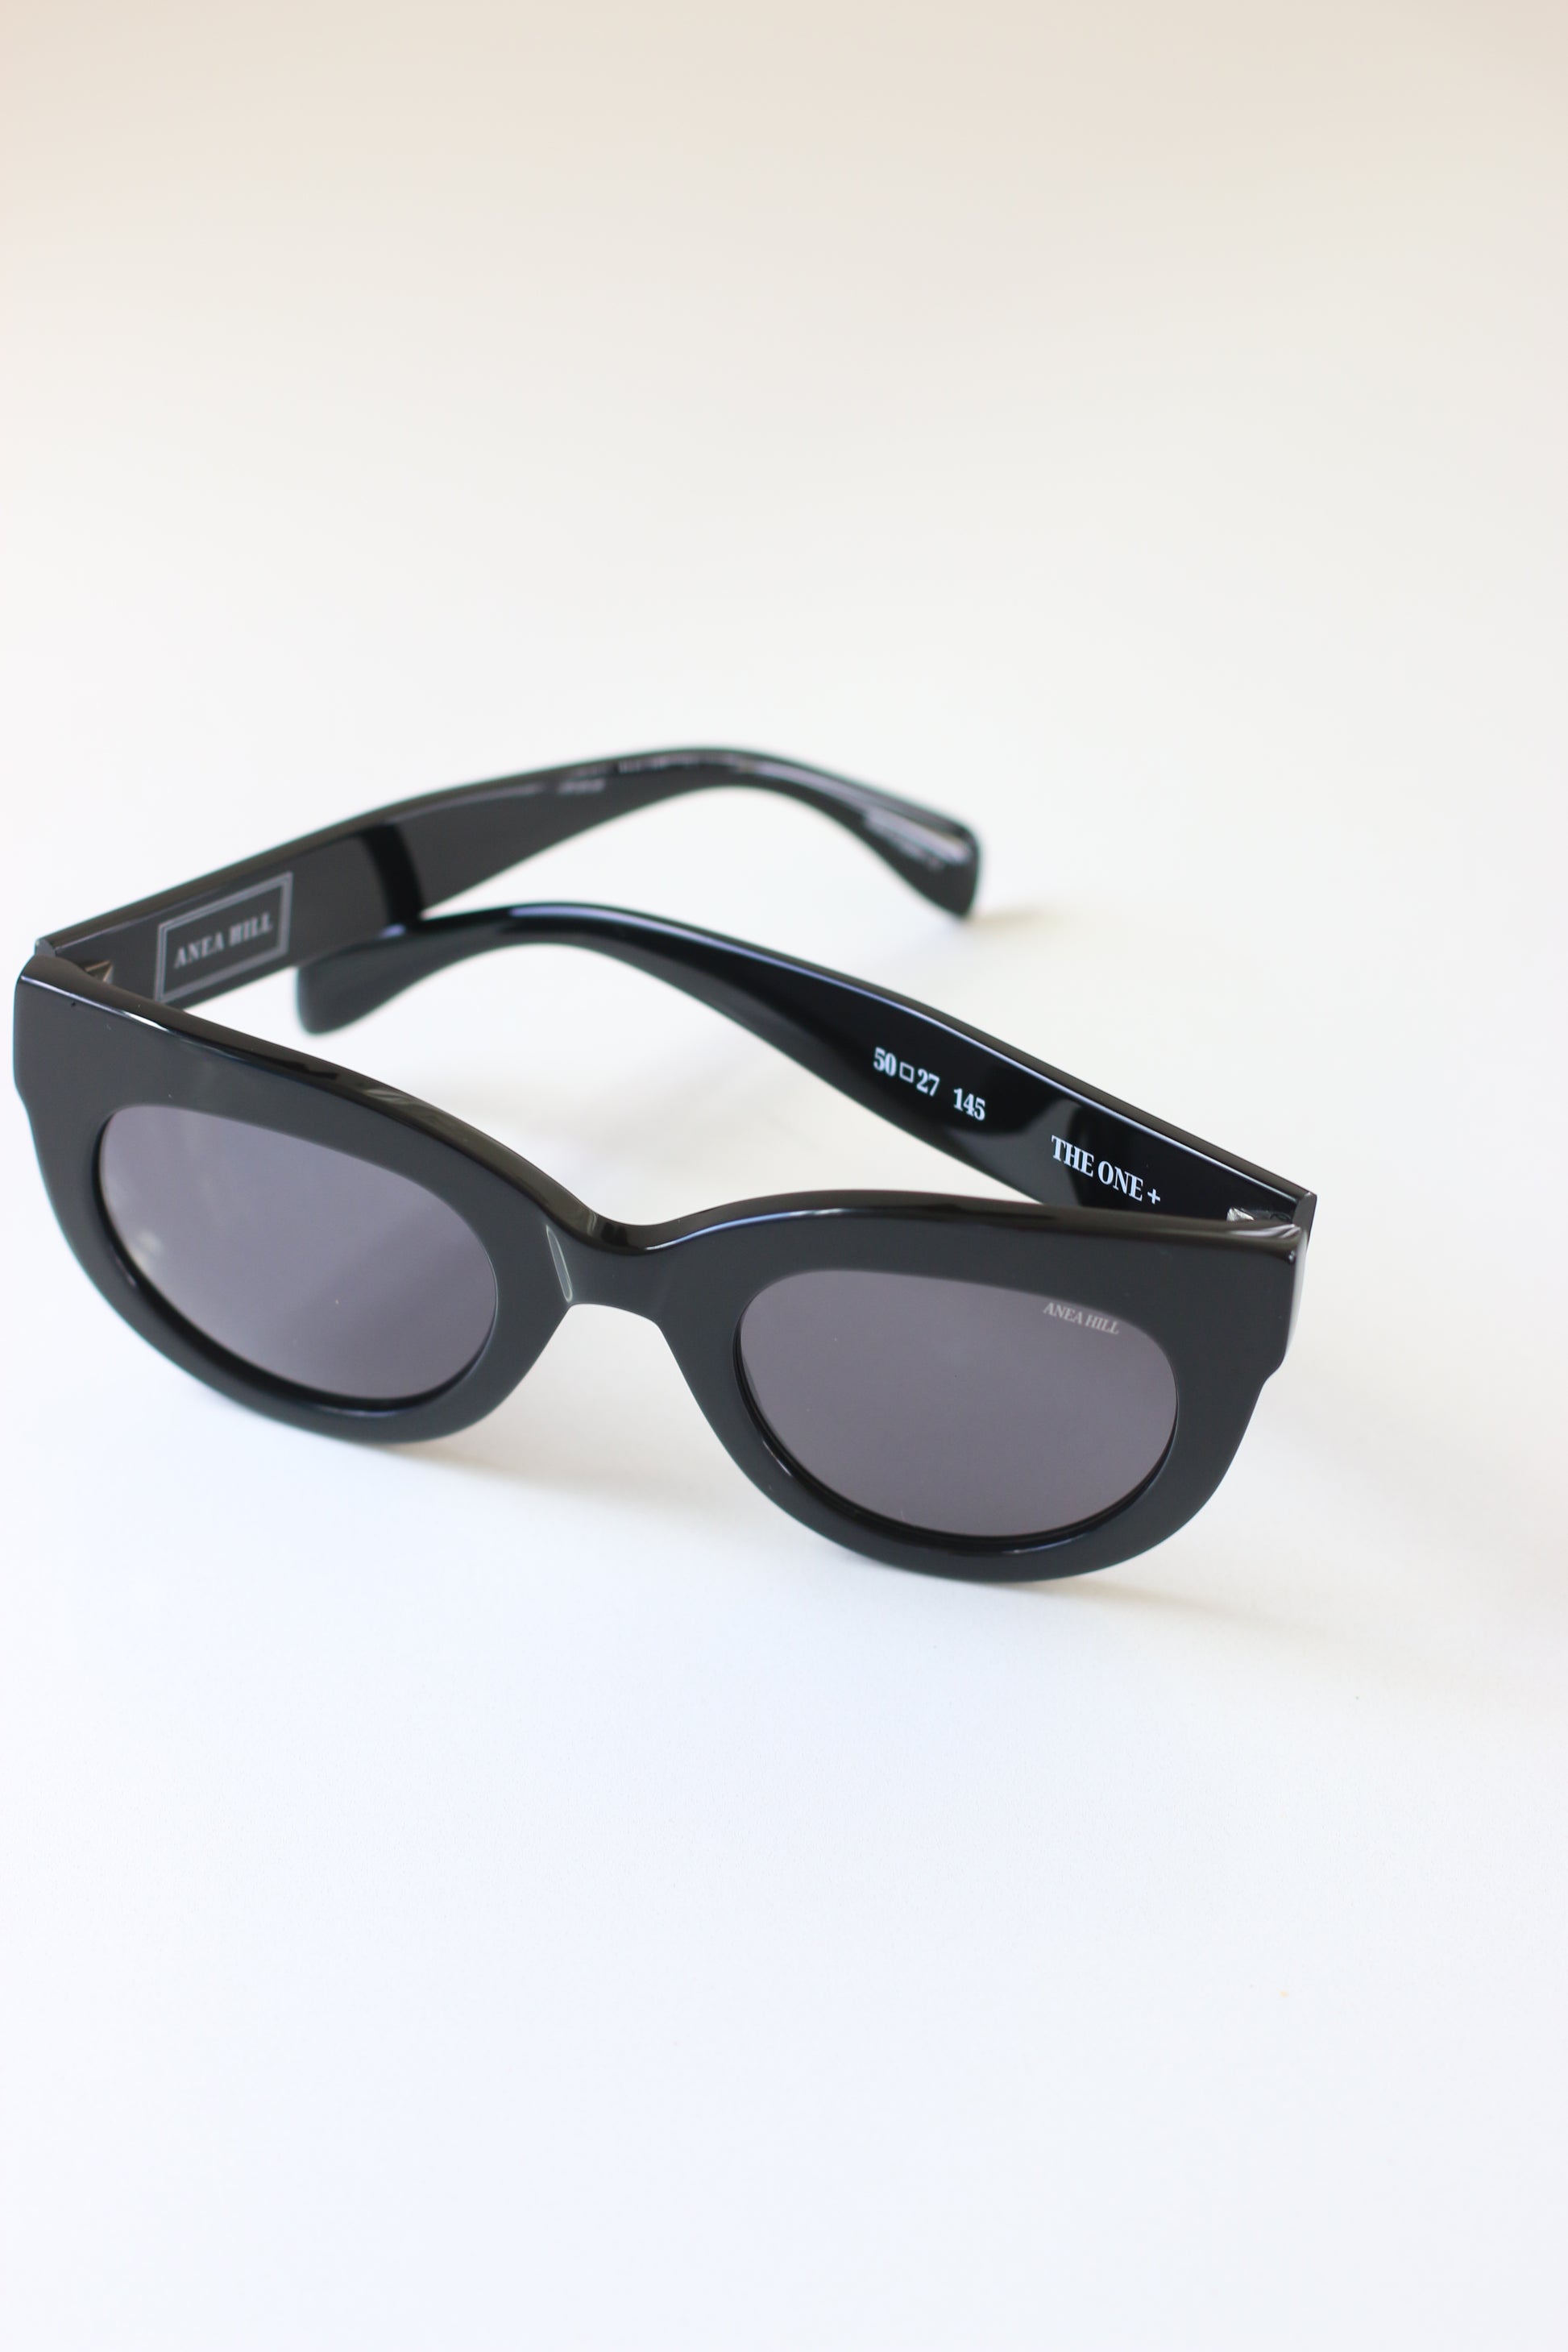 Fashionable and sophisticated oversized cat-eye sunglasses in black acetate